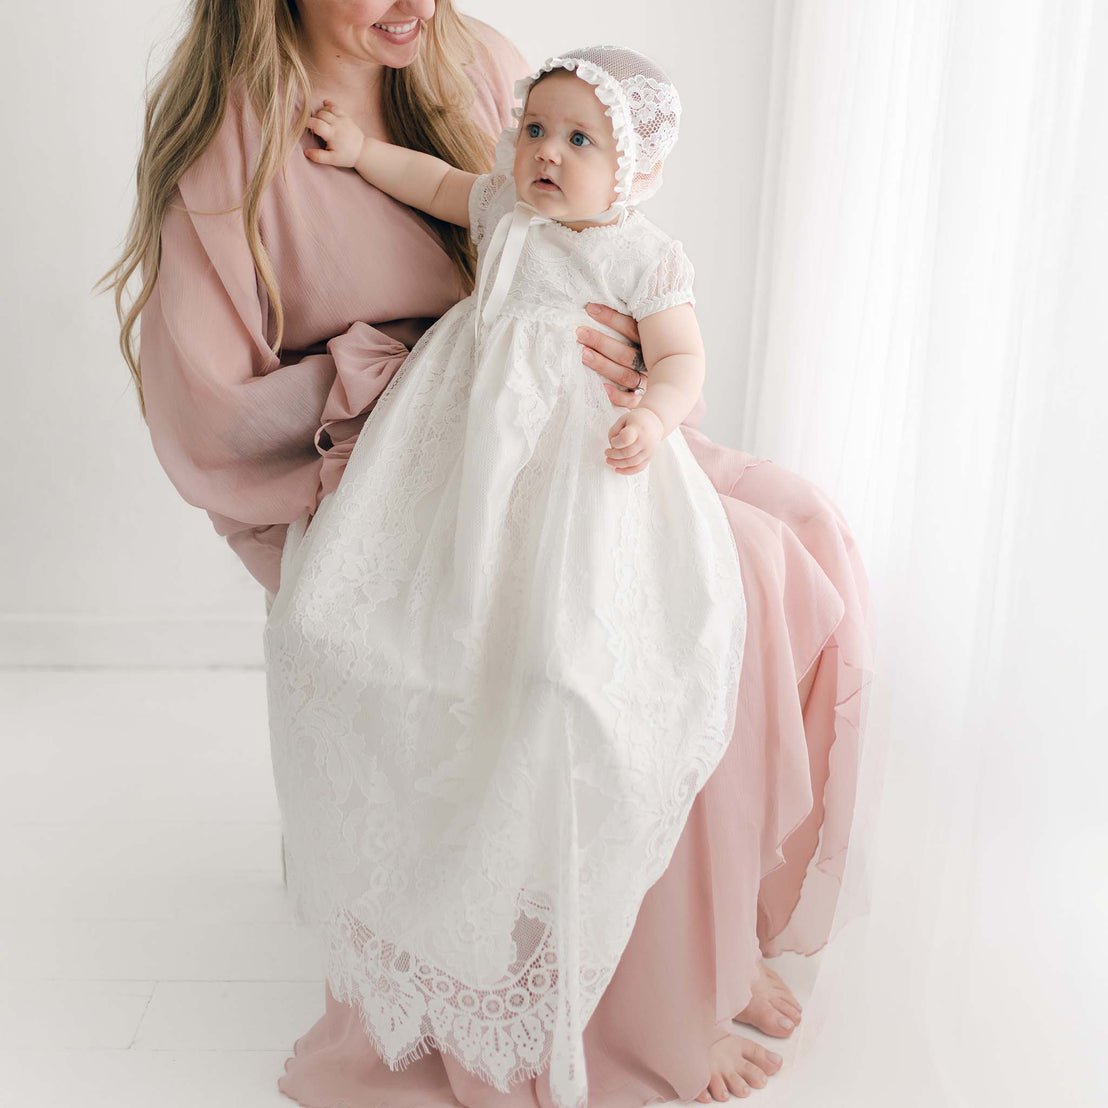 A woman in a light pink dress sits, holding a baby dressed in the Victoria Puff Sleeve Christening Gown and Bonnet. The baby looks curious, reaching up. The background is softly lit with a white curtain.